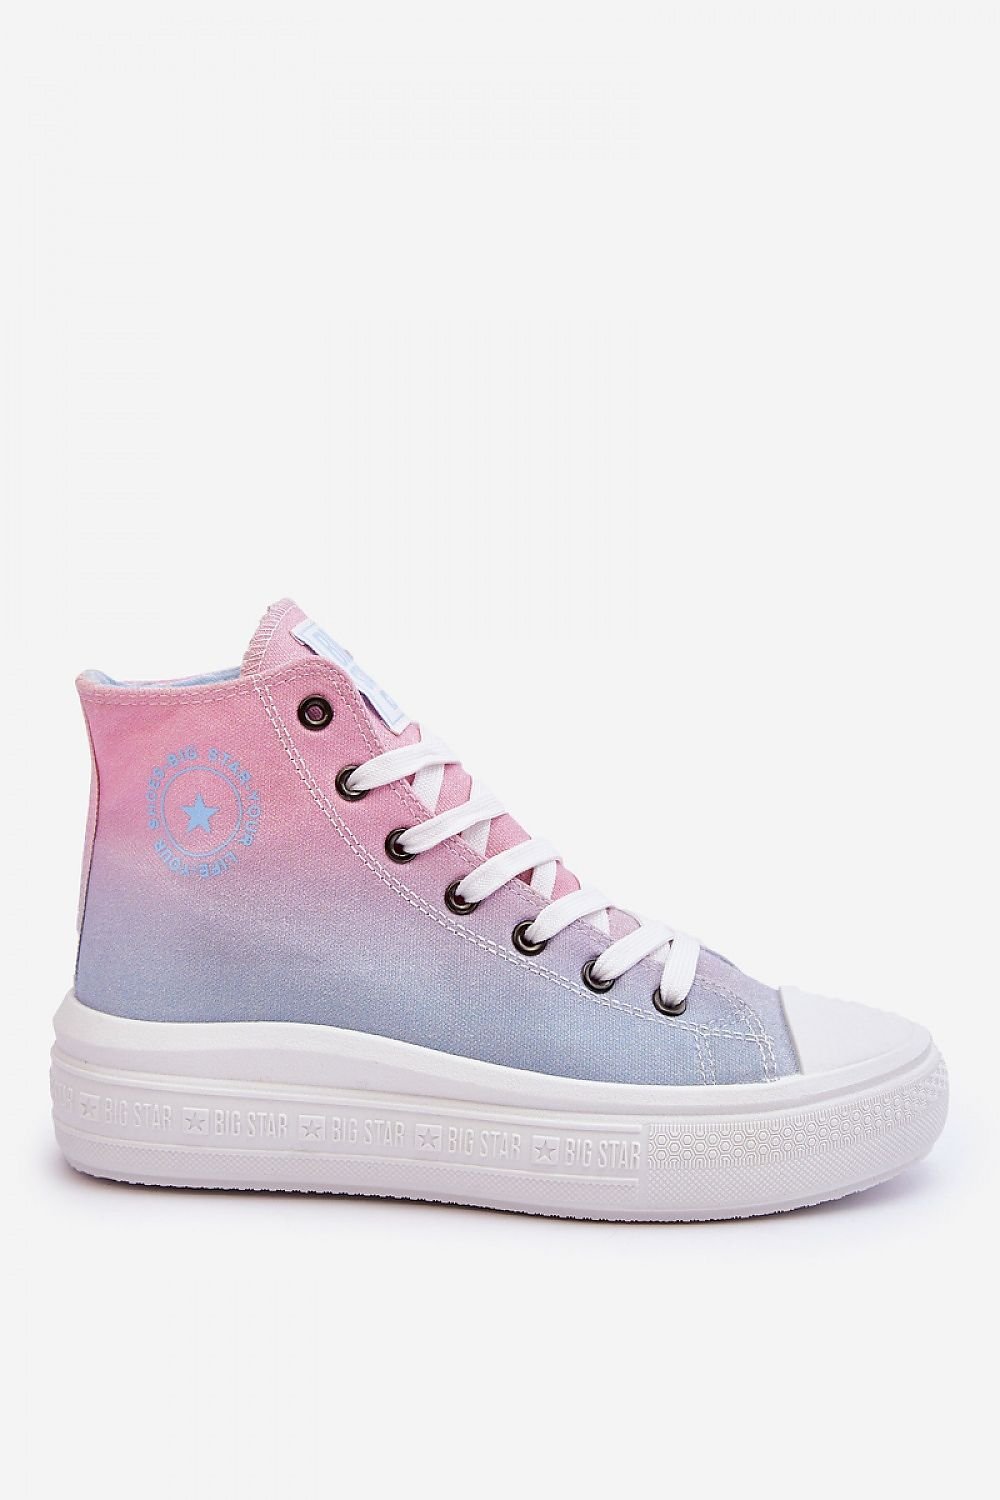 TEEK - Ombre Laced High-Top Platform Sneakers SHOES TEEK MH   